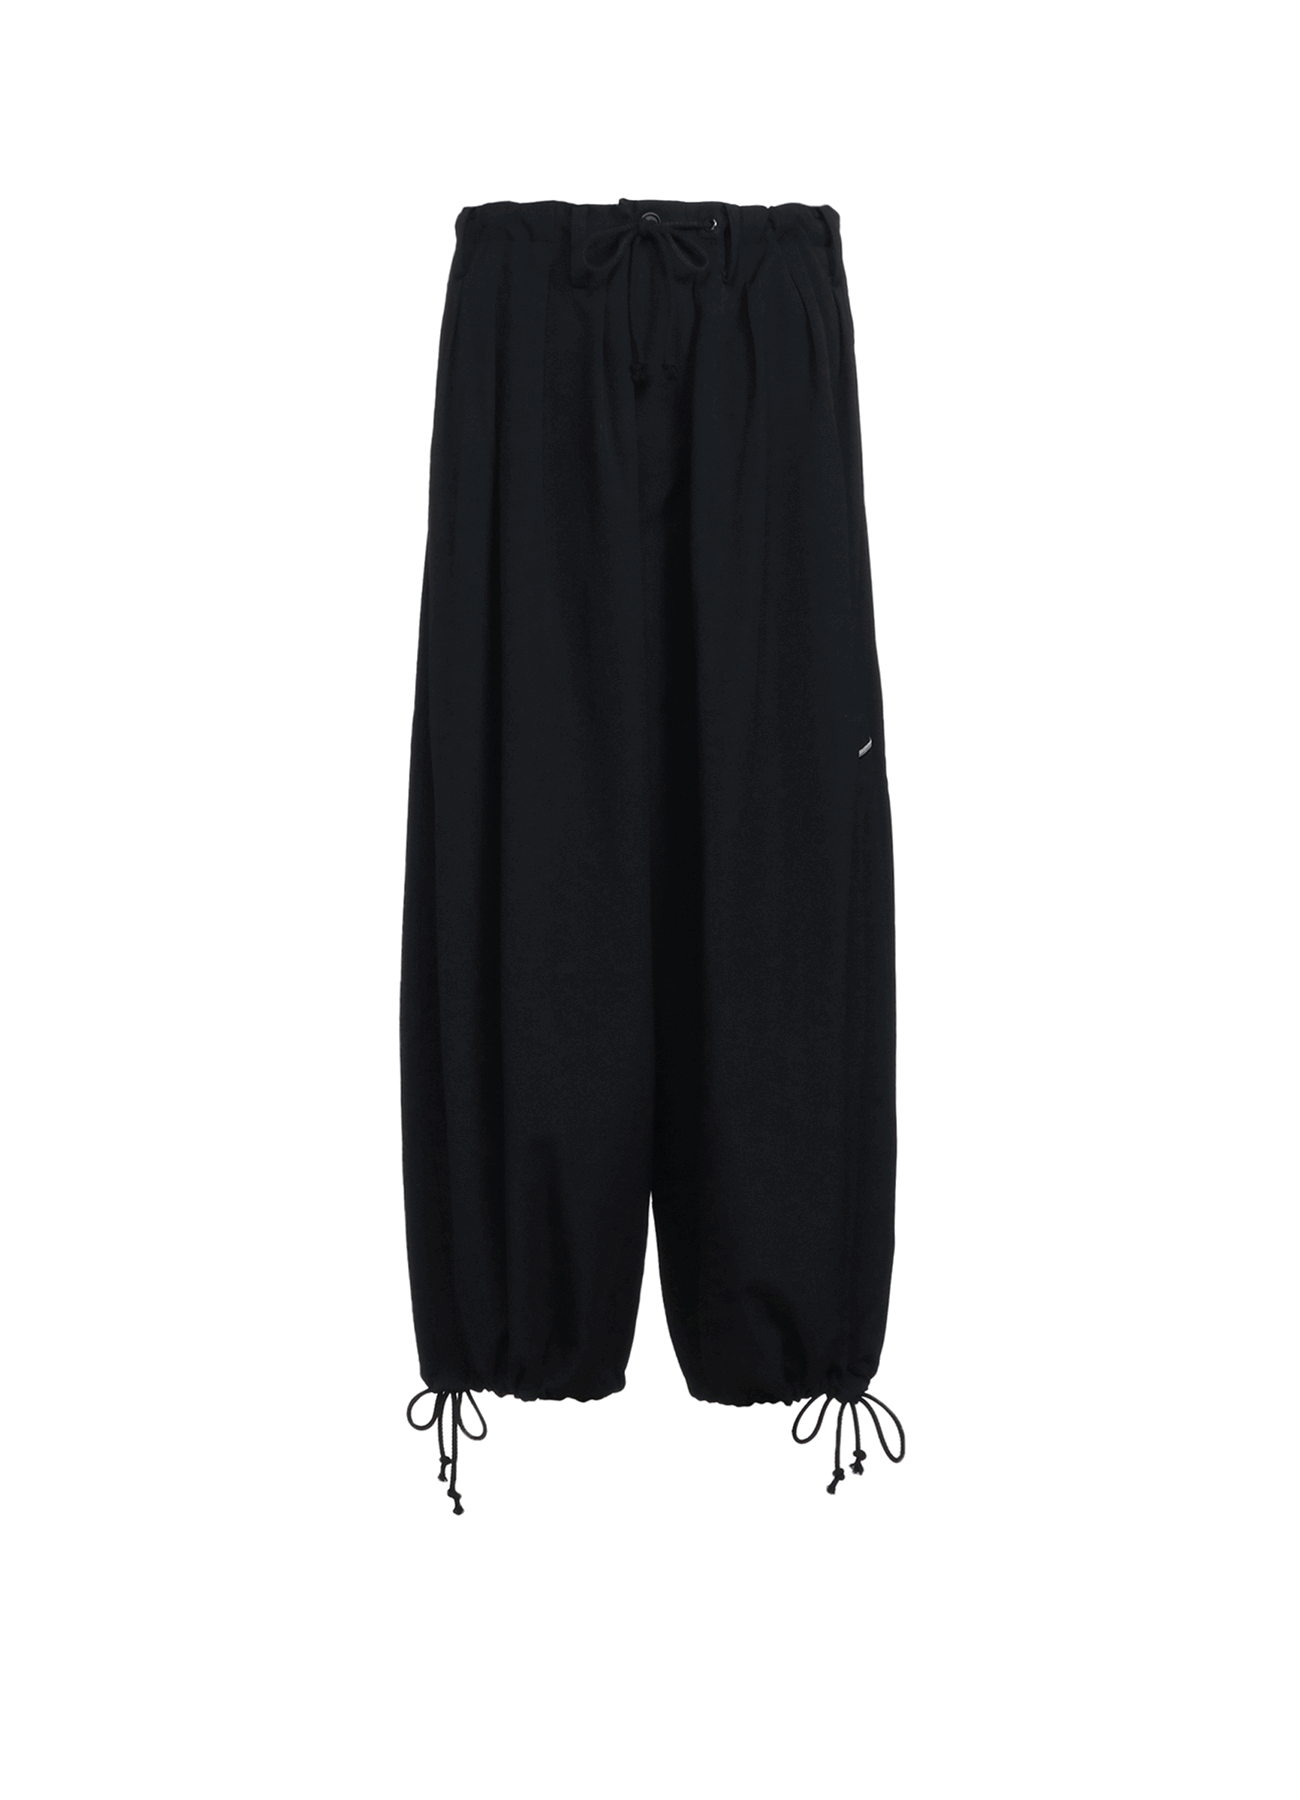 WASHER FINISHED WOOL GABARDINE BALLOON PANTS WITH ZIPPER POCKETS